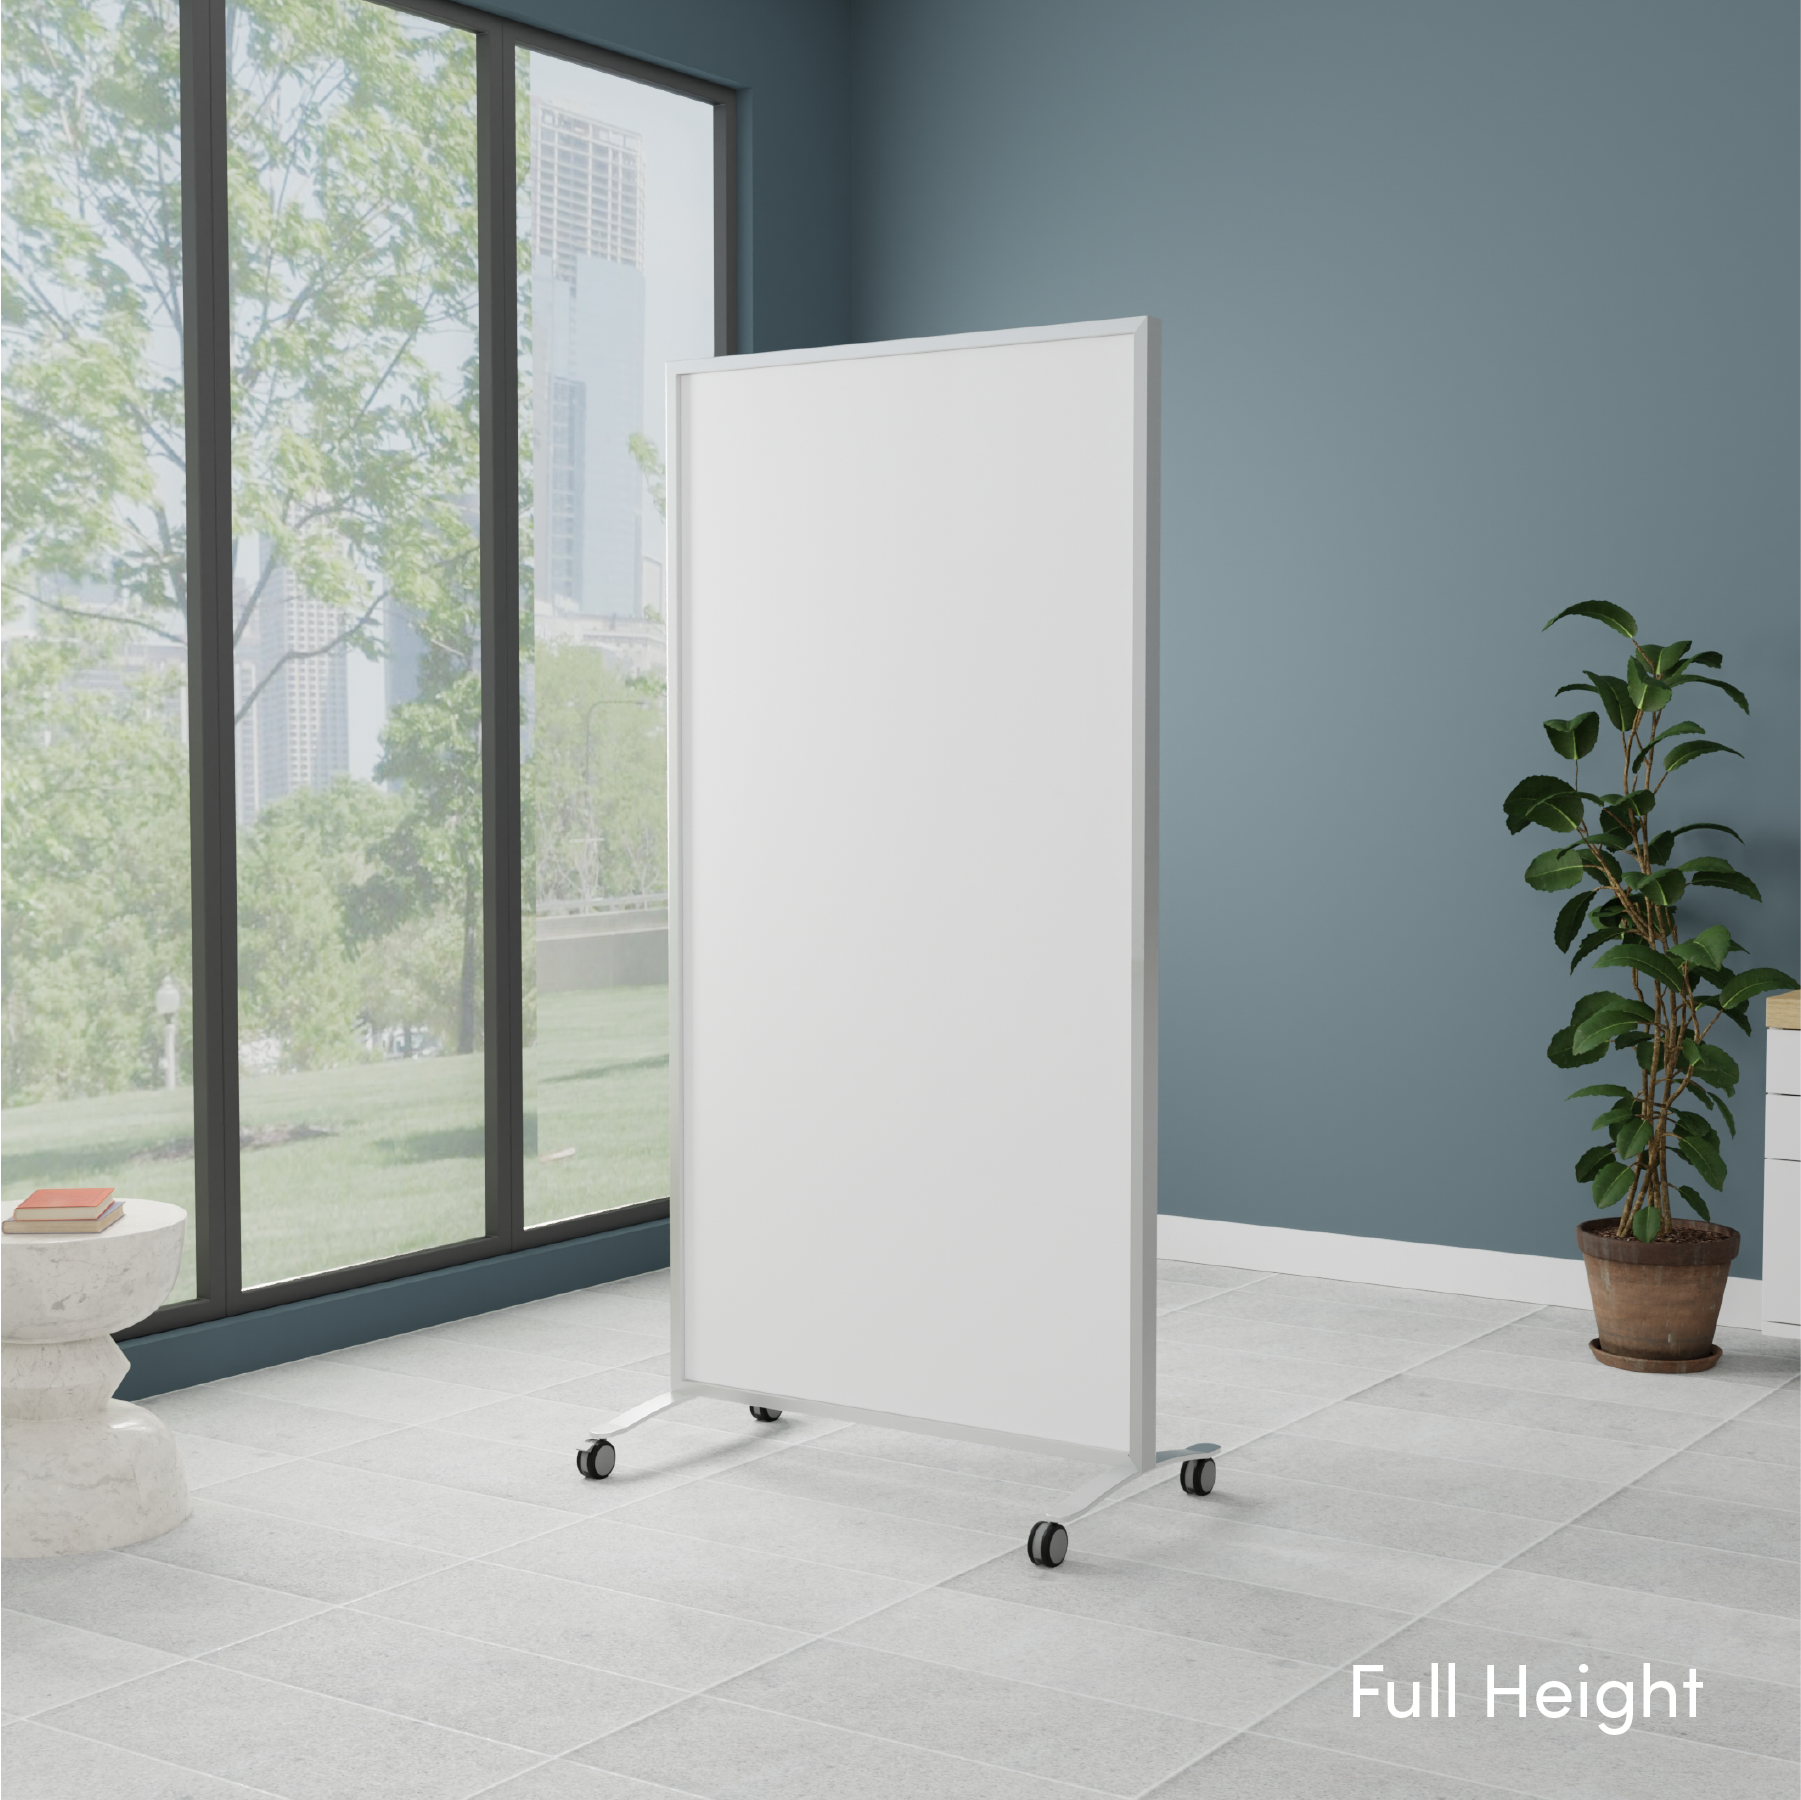 CONNECT X2 Mobile Whiteboard